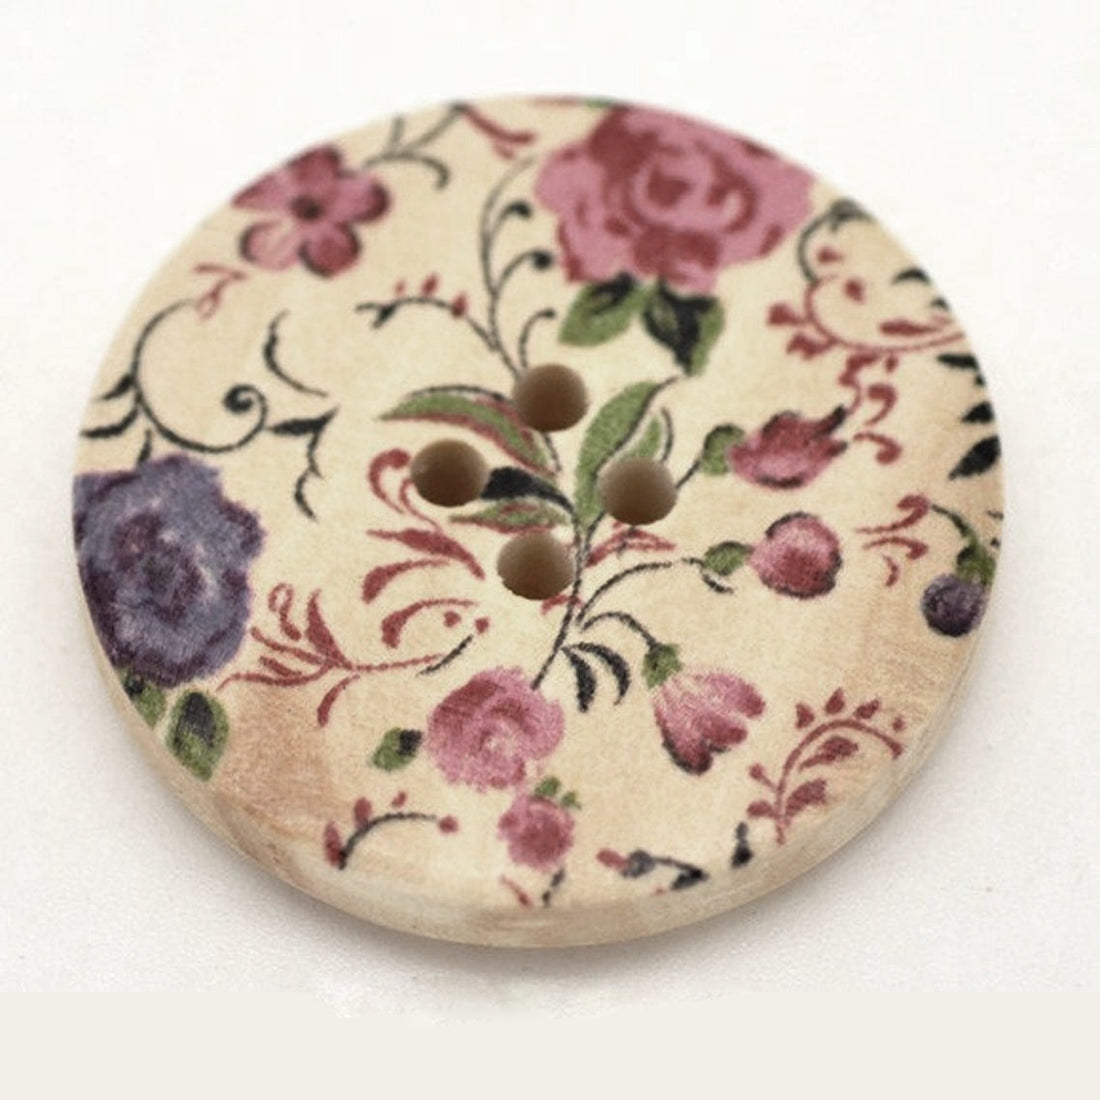 Cottage Flower Pattern Wooden Sewing Buttons 30mm - set of 6 natural wood button